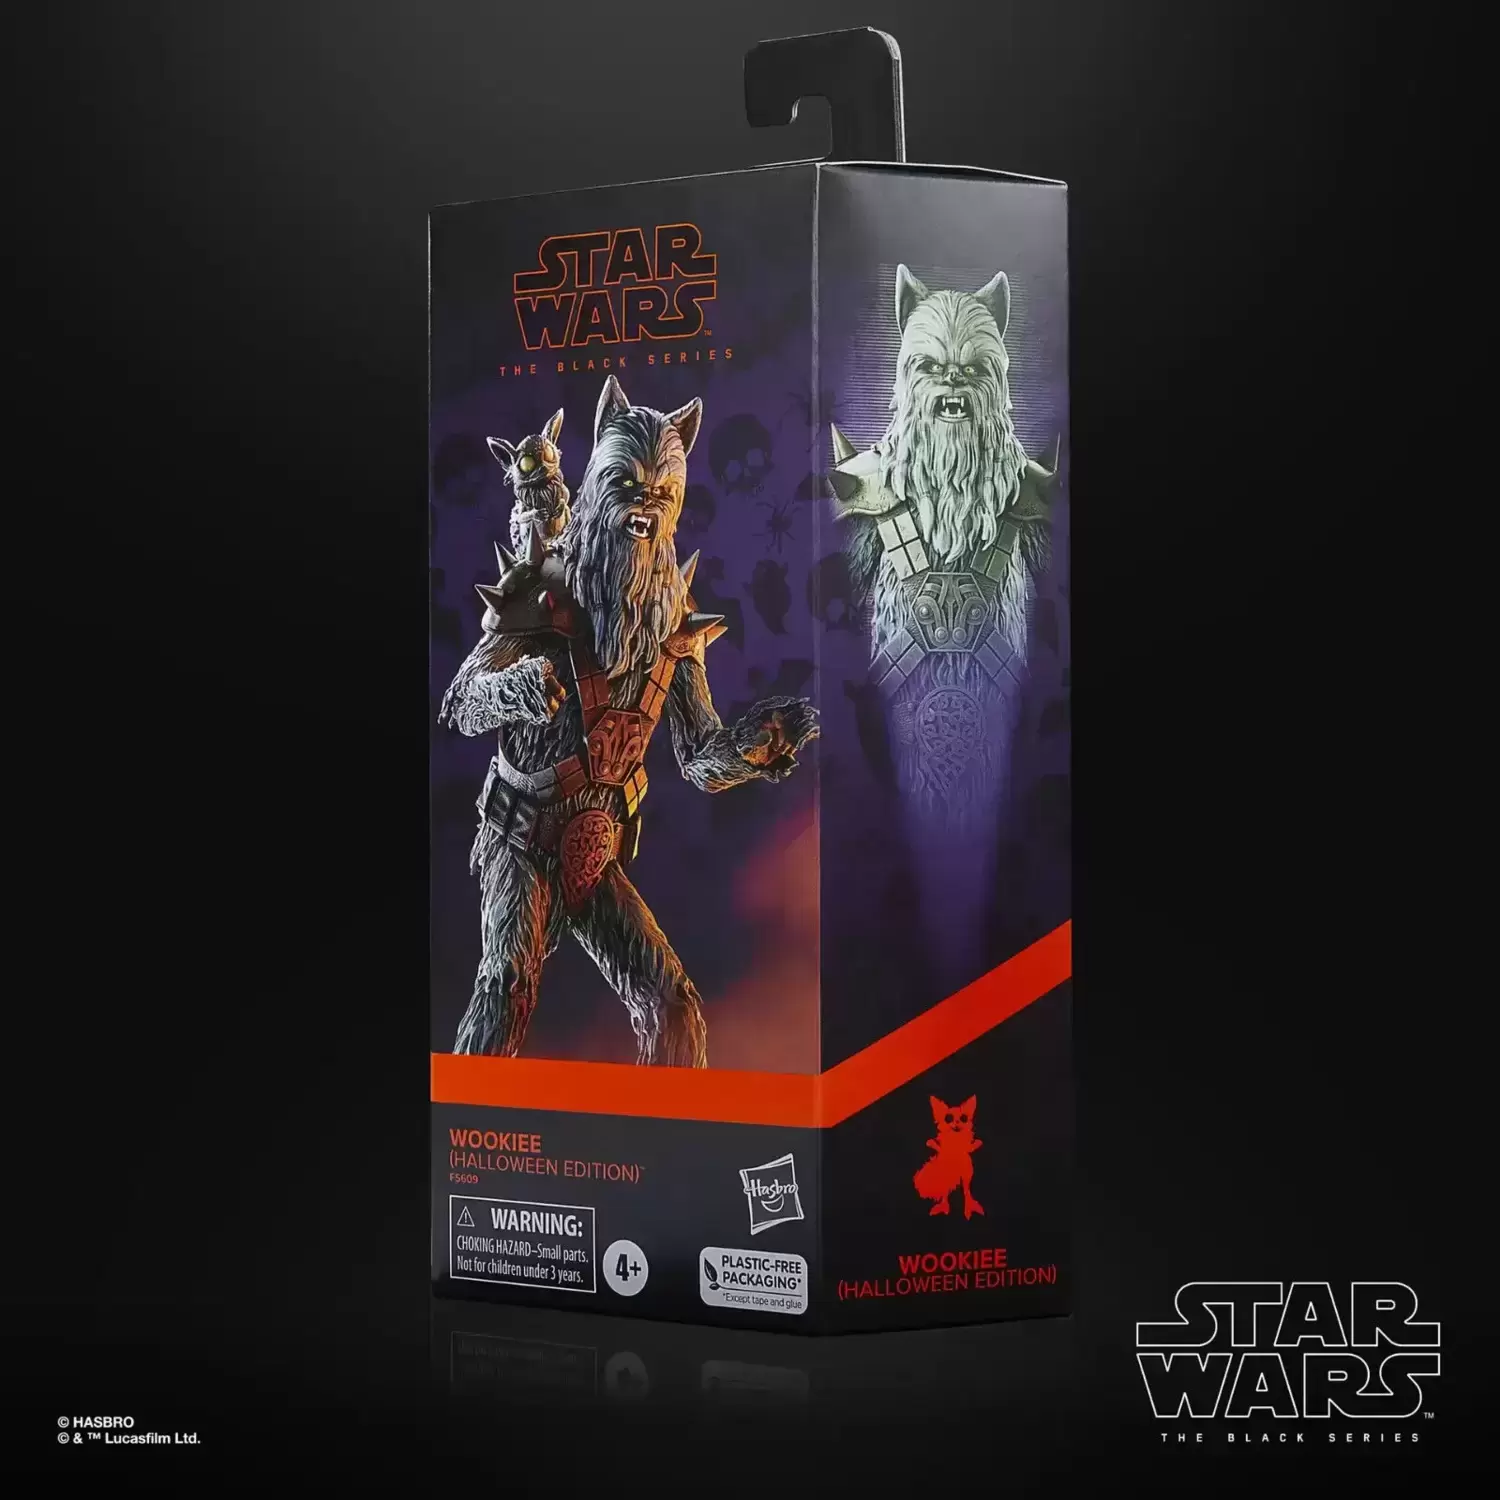 The Black Series - Colored Box - Wookiee (Halloween Edition)